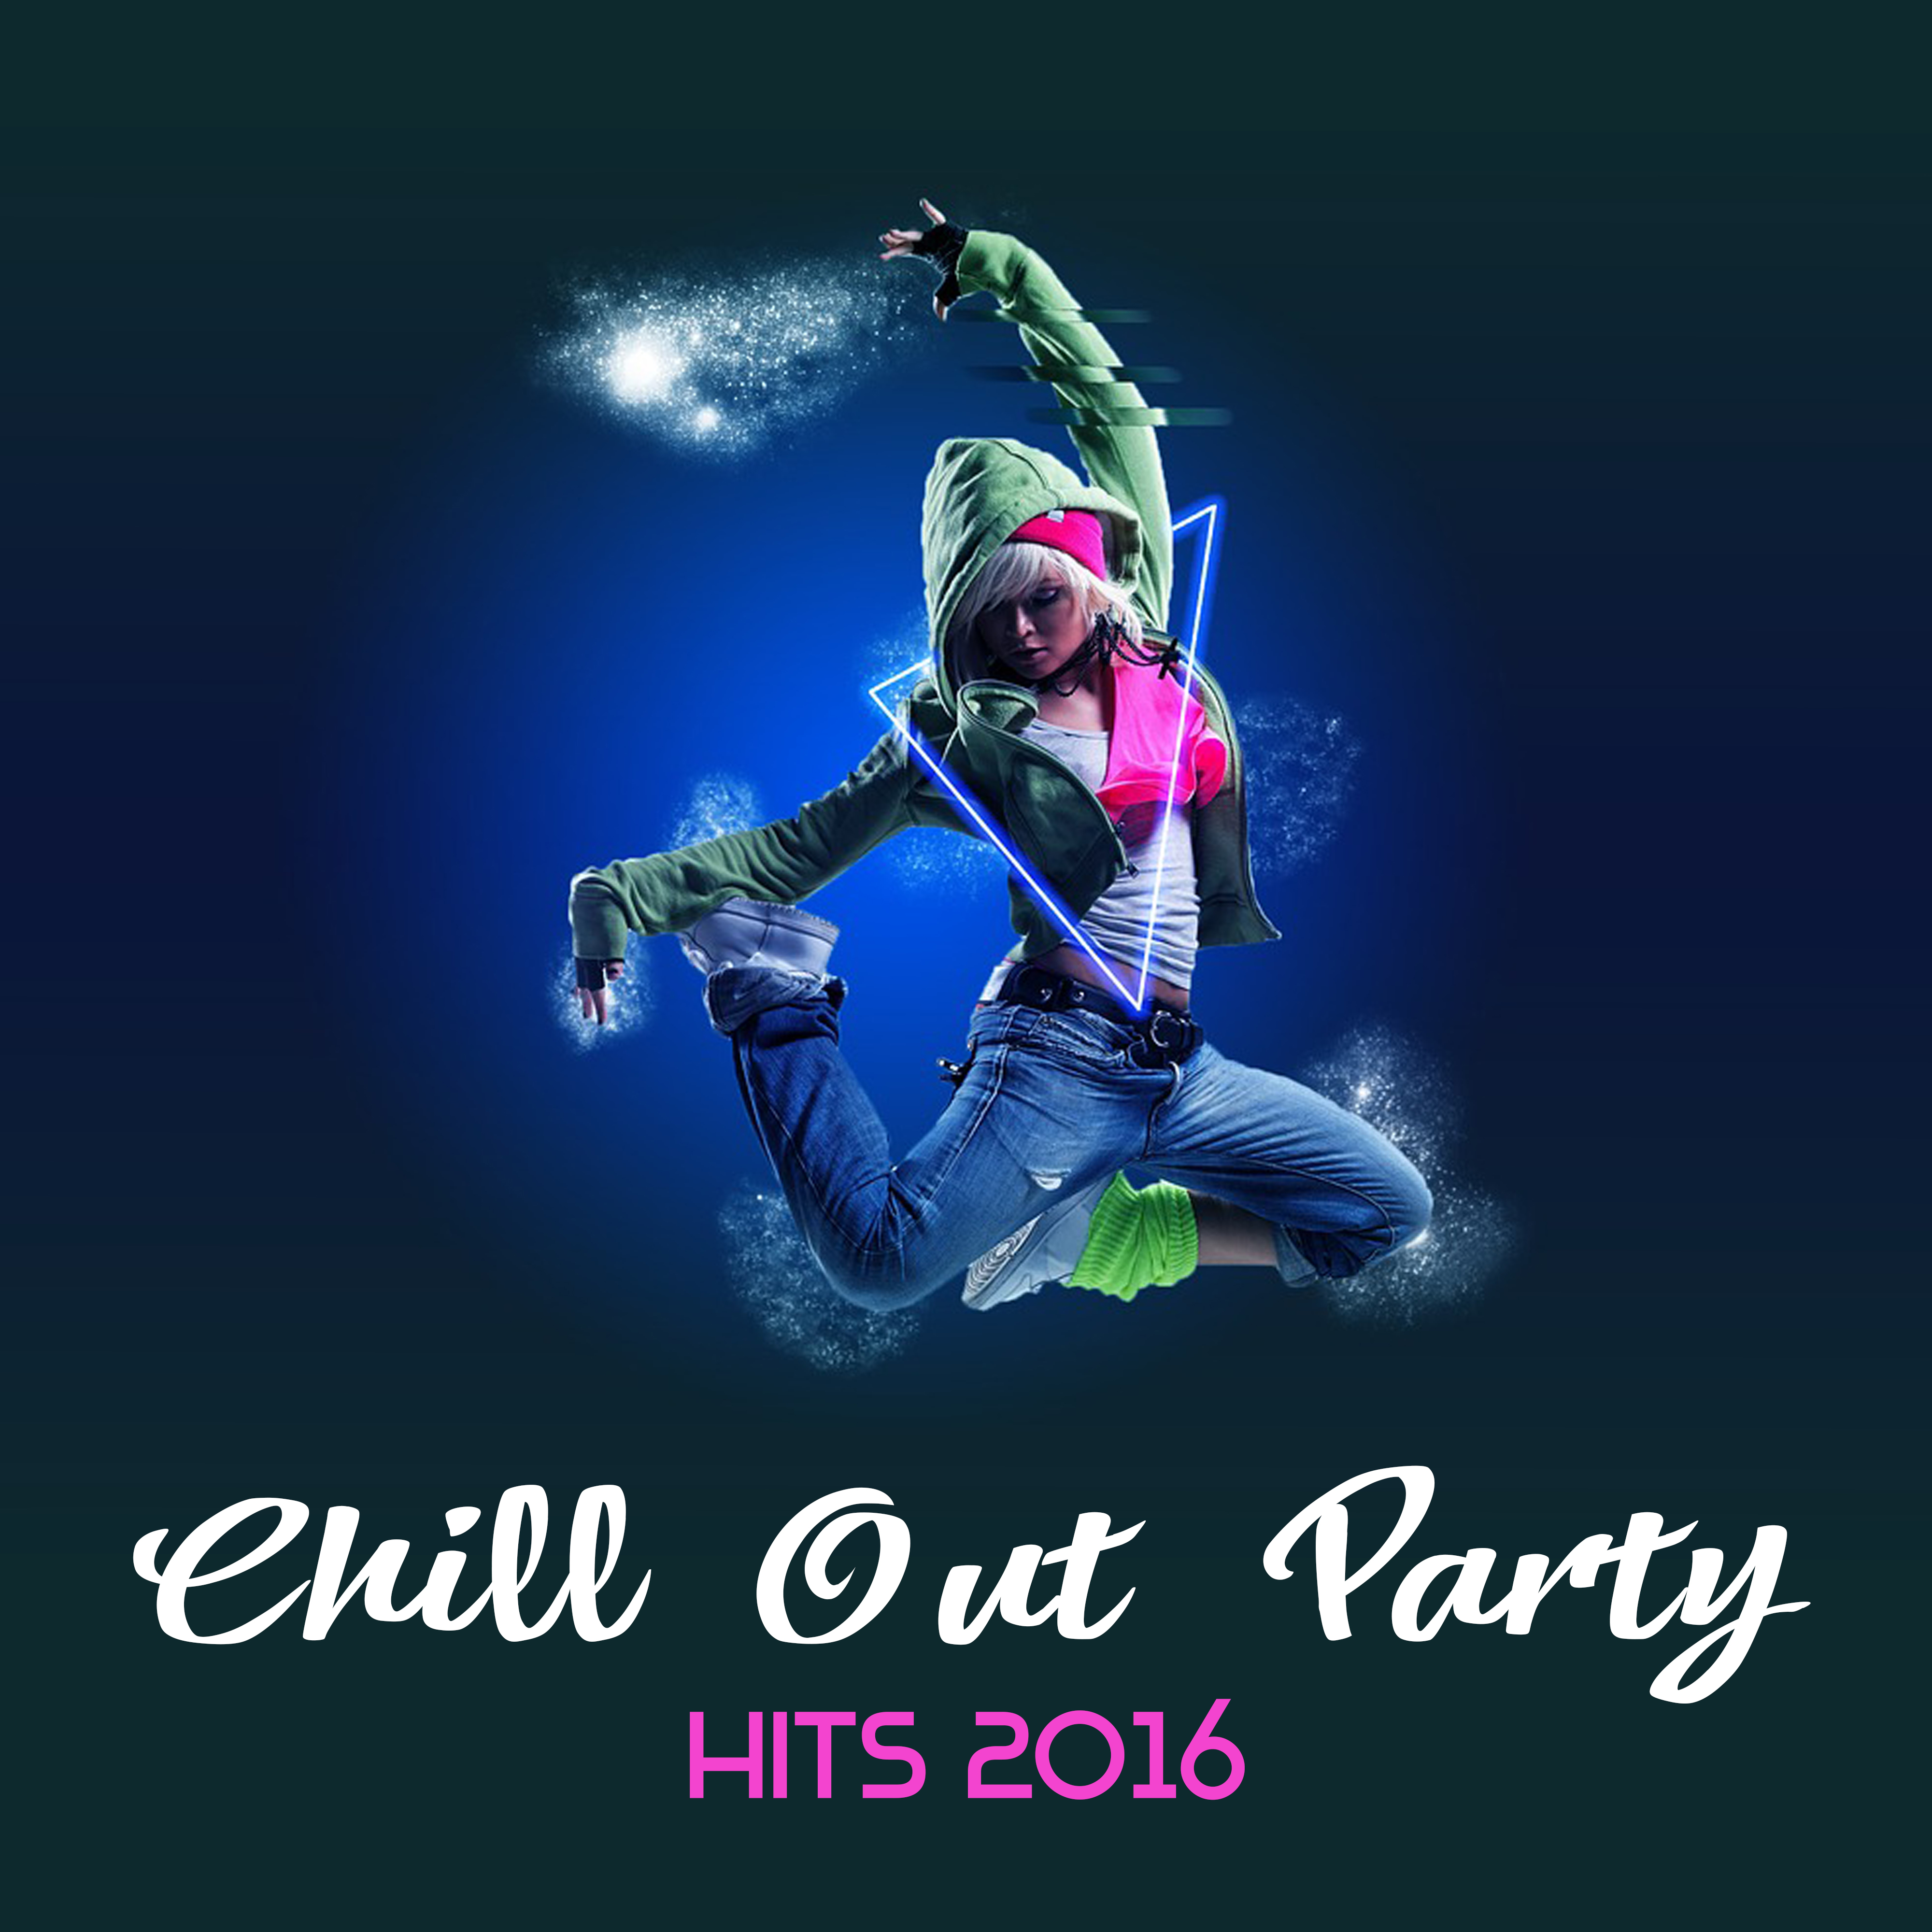 Chill Out Party Hits 2016  Deep Chillout, Music for Party, Dance Music, Full Relaxation